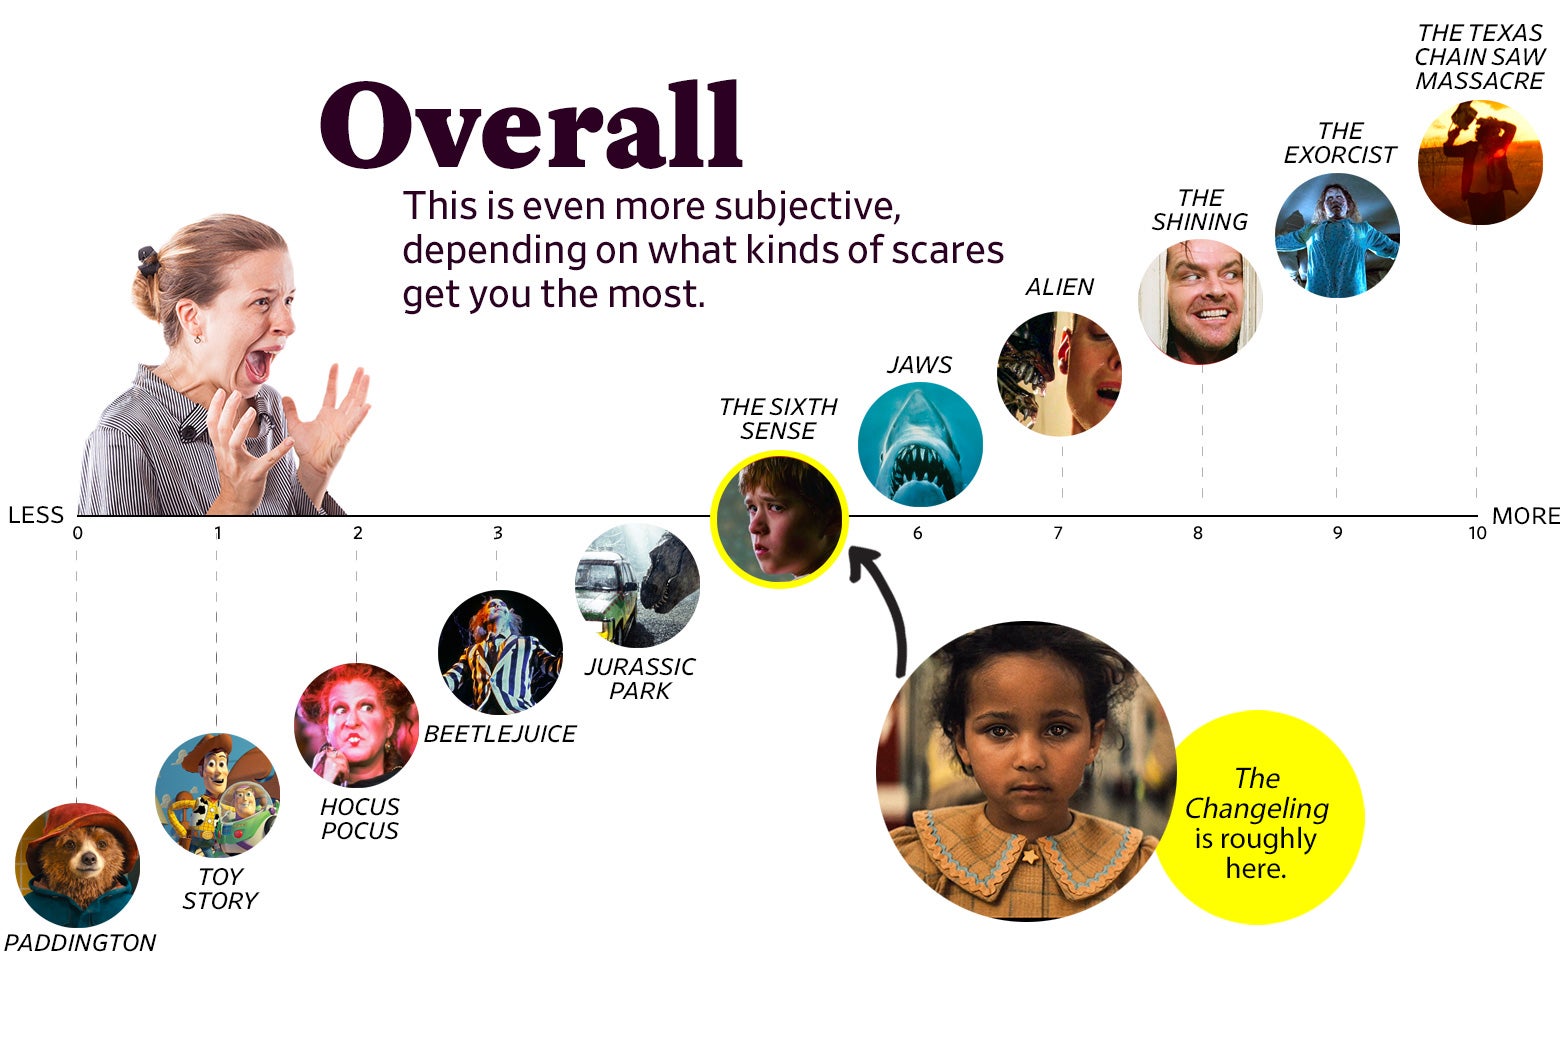 A chart titled “Overall: This is even more subjective, depending on what kinds of scares get you the most” shows that The Changeling ranks a 5 overall, roughly the same as The Sixth Sense. The scale ranges from Paddington (0) to The Texas Chain Saw Massacre, 1974 (10).